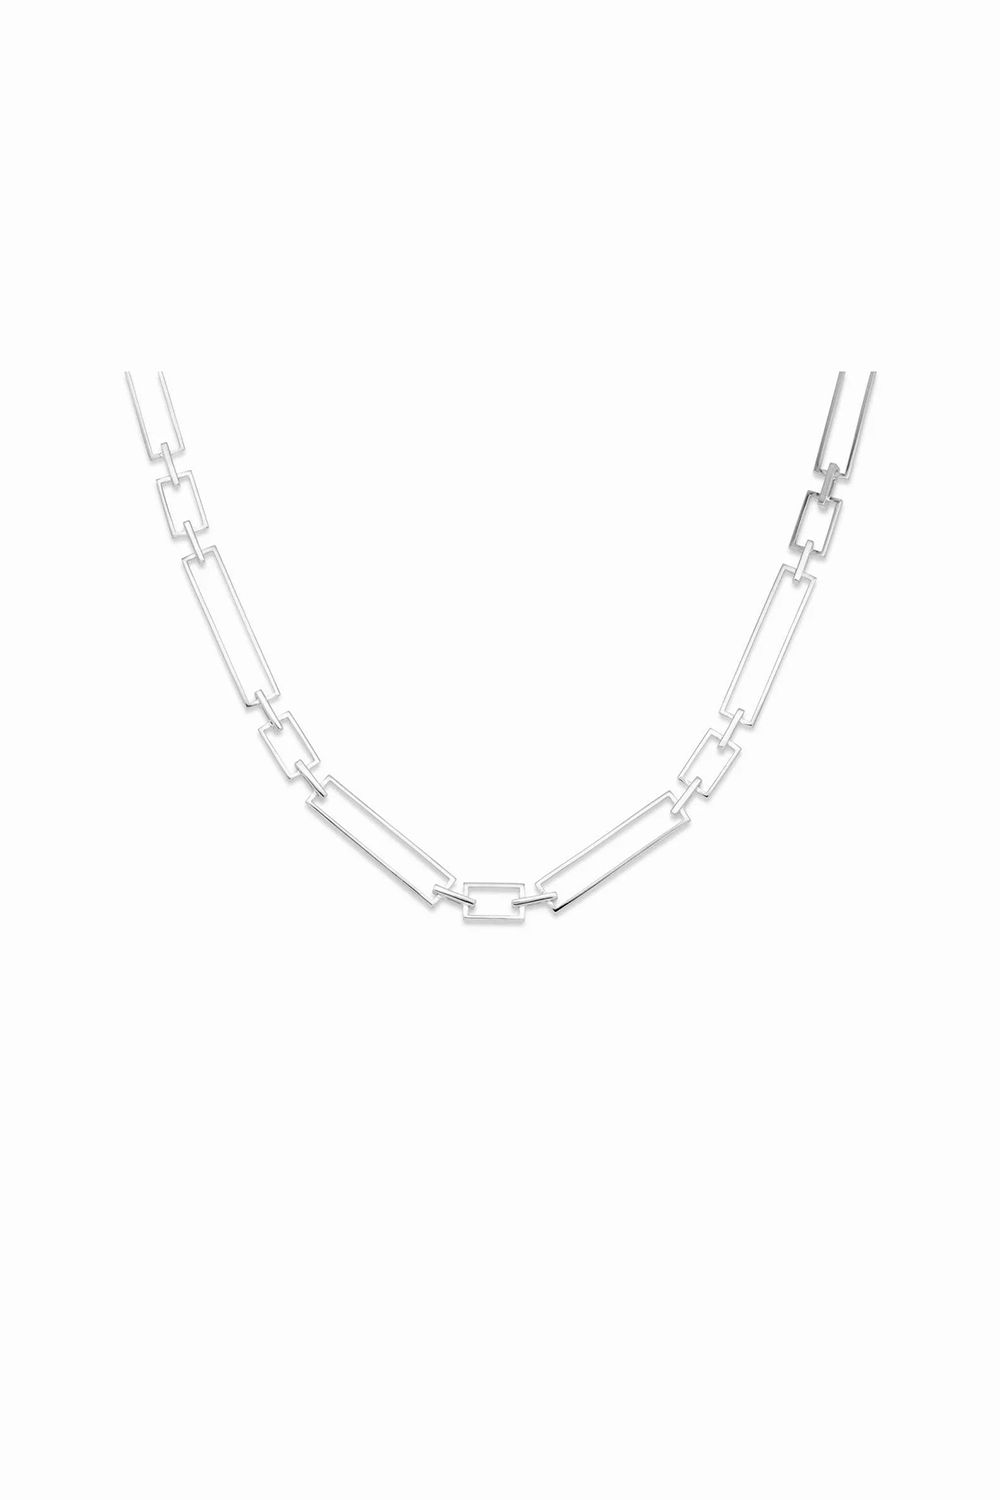 SQUARE CHAIN NECKLACE / スクエア チェーン ネックレス STERLING SILVER 925 (シルバー) -  STERLING SILVER 925 (受注生産) - S(受注生産)